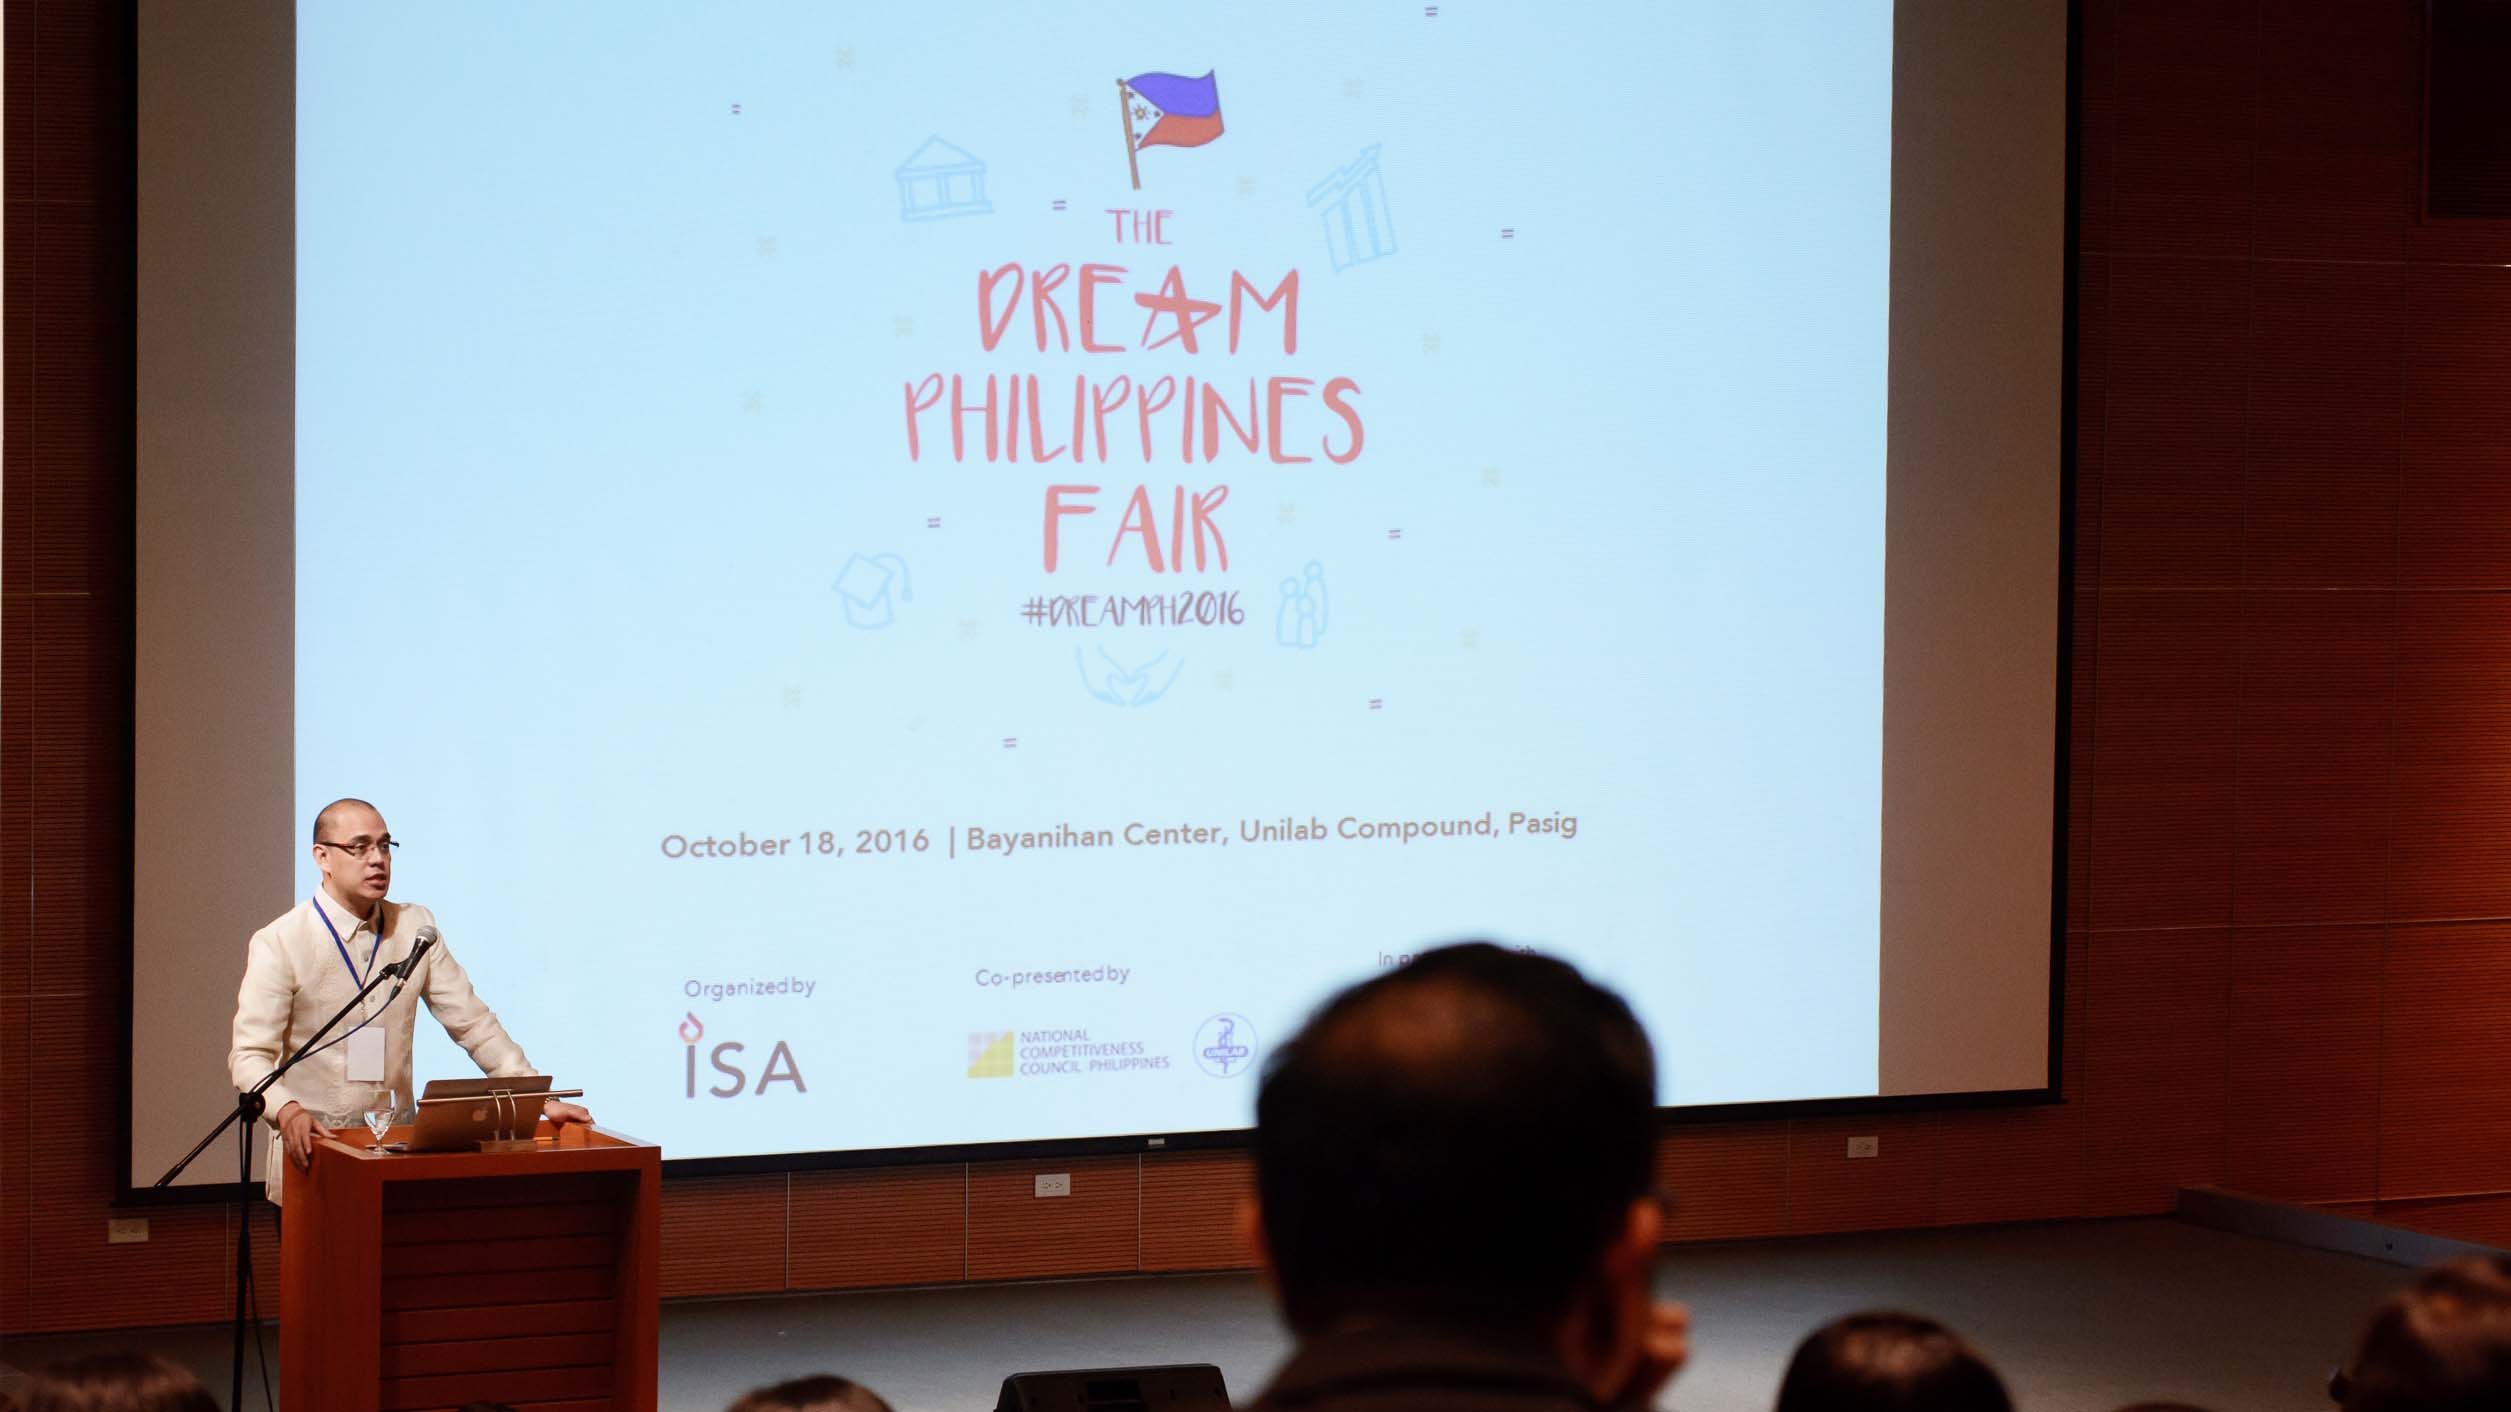 Dream Philippines Fair: A nation-building event for all